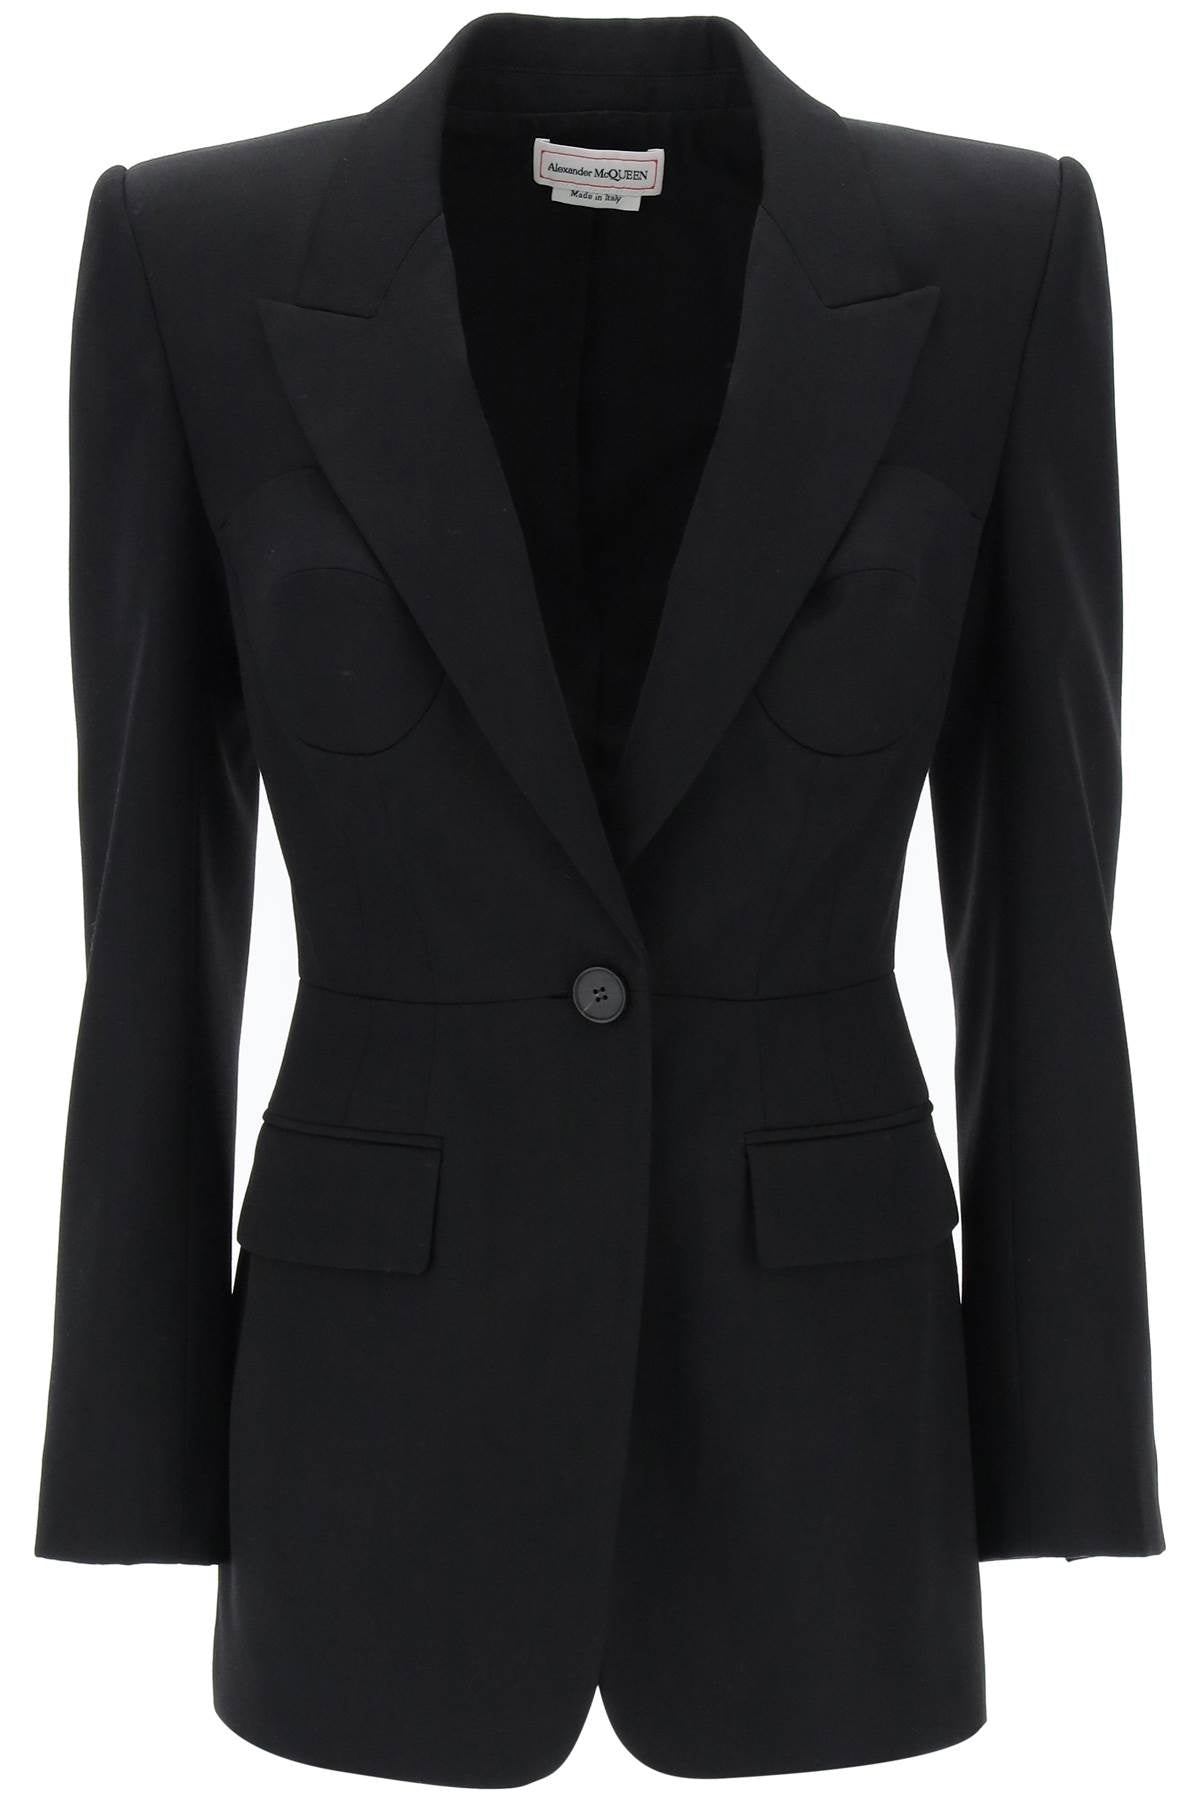 Alexander mcqueen fitted jacket with bustier details-0